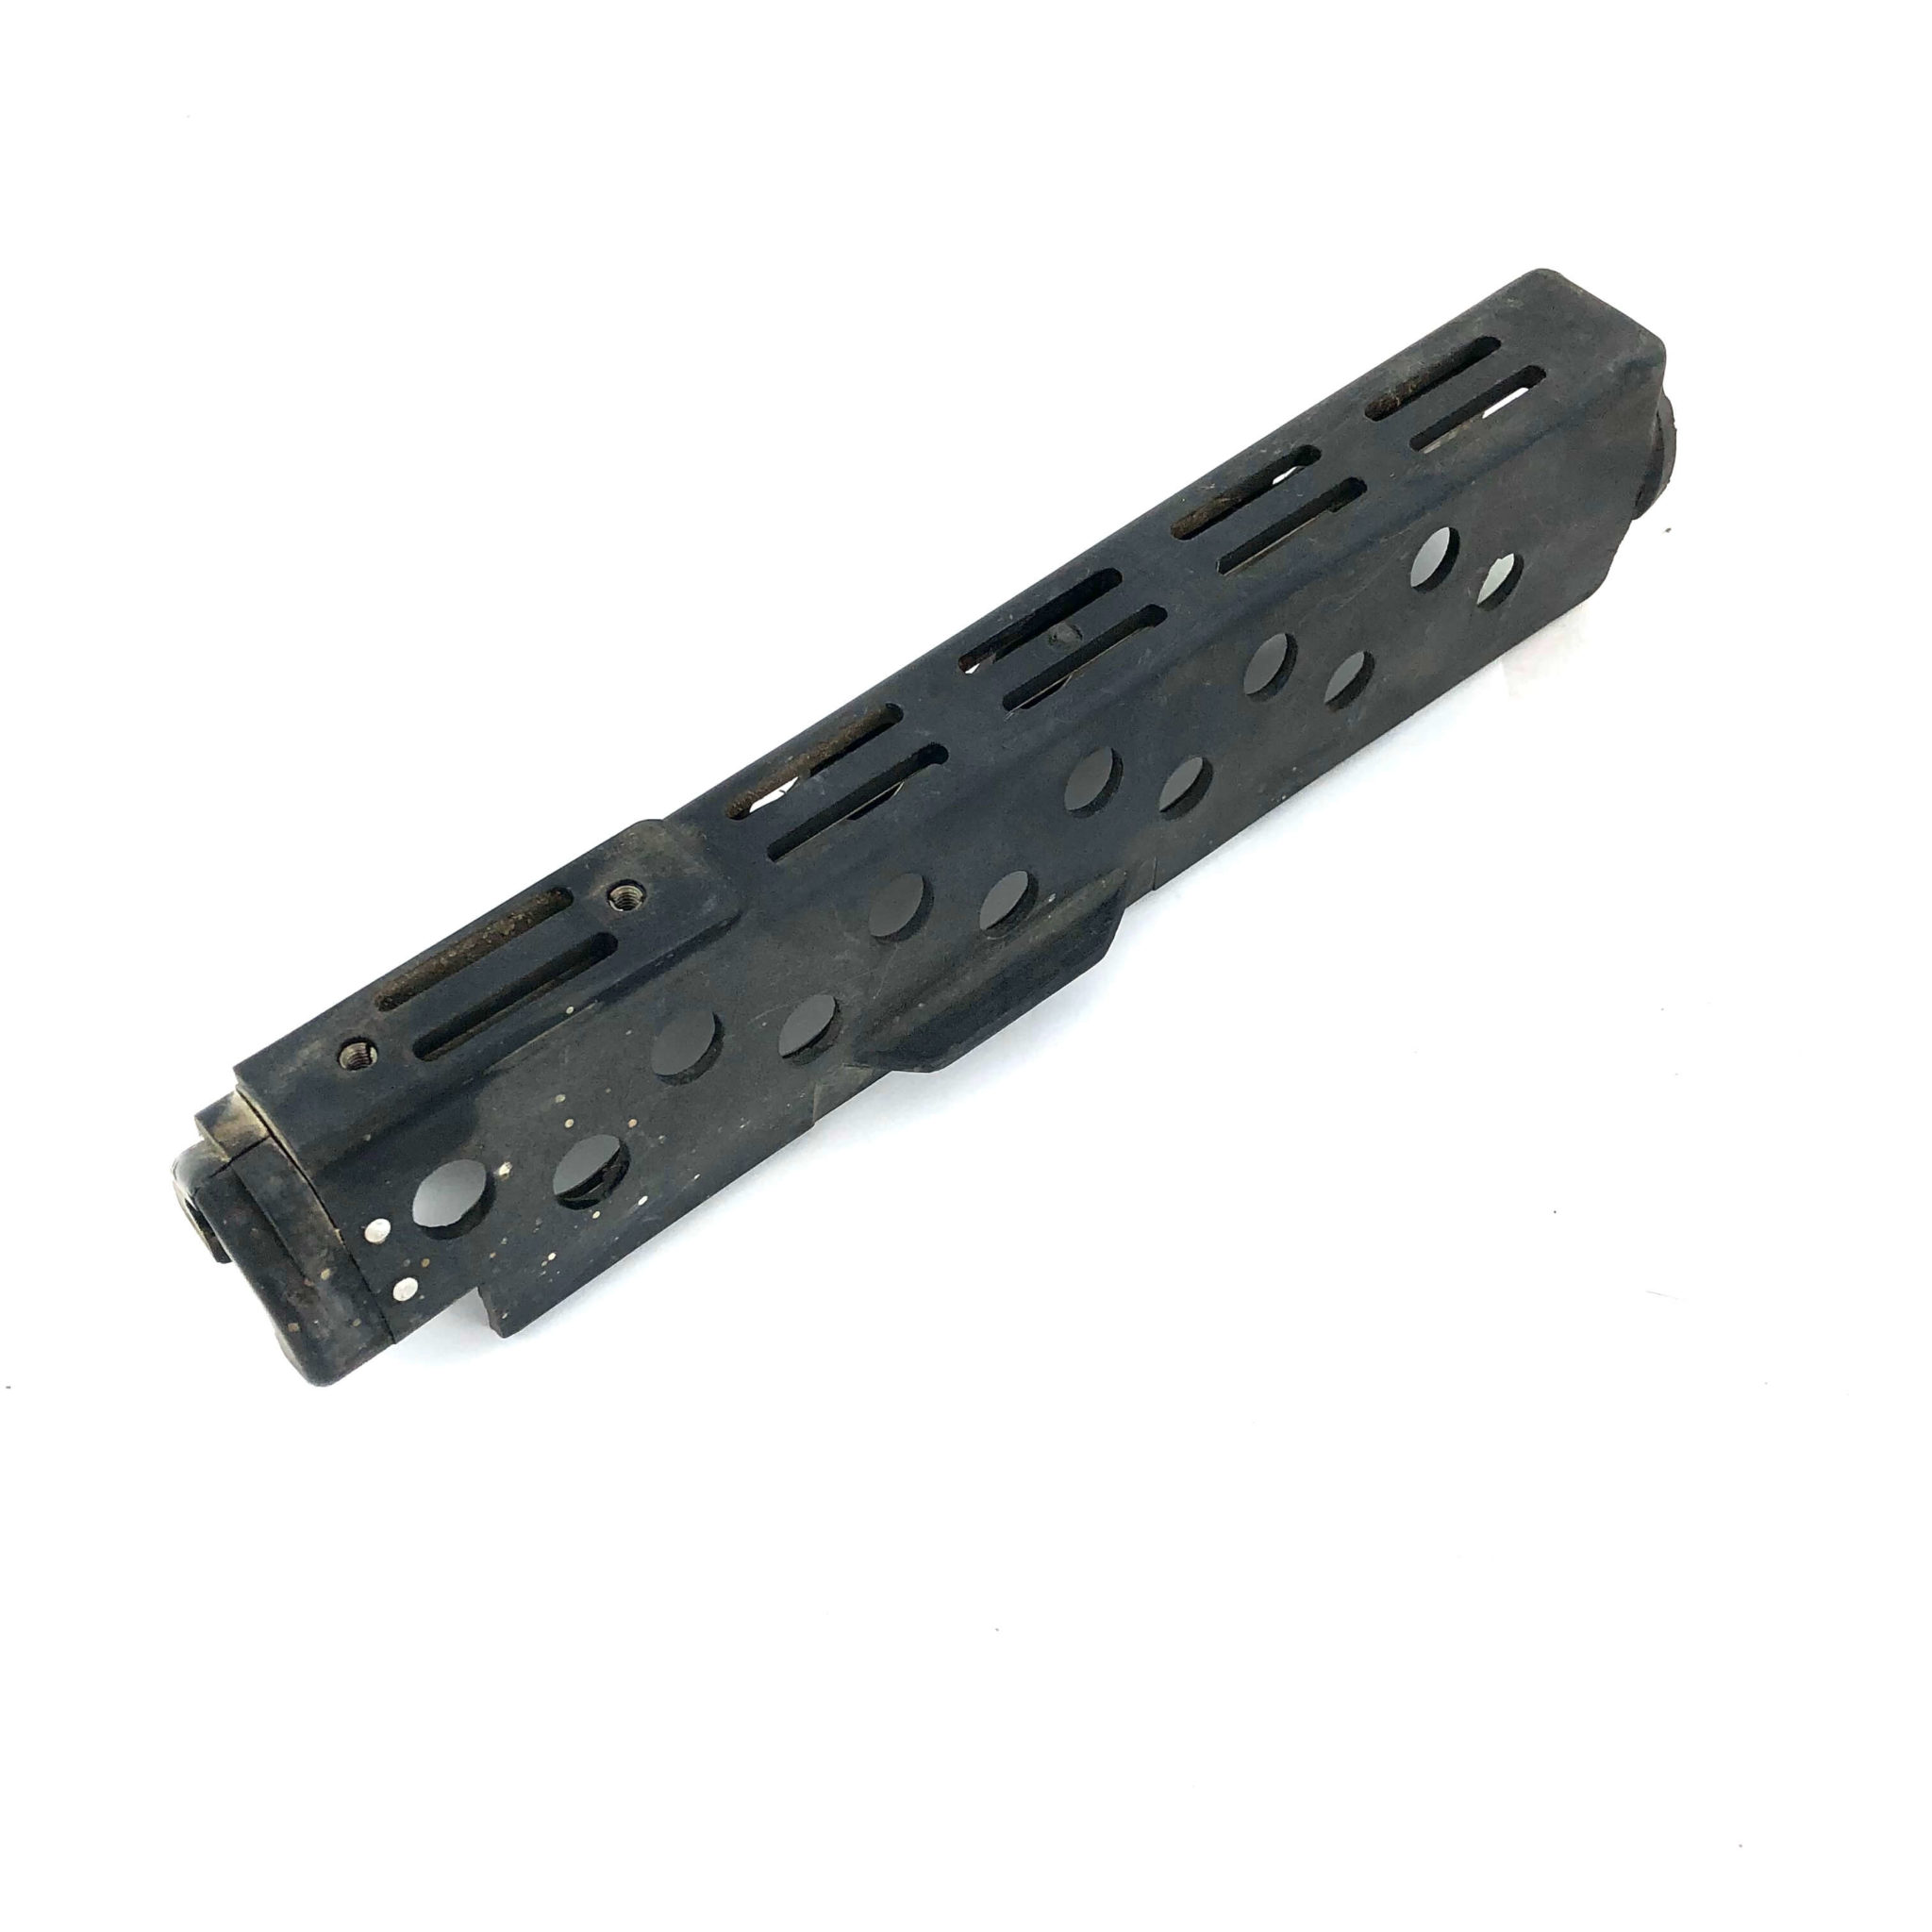 These are rifle length hand guards and will fit M16 style rifles. 